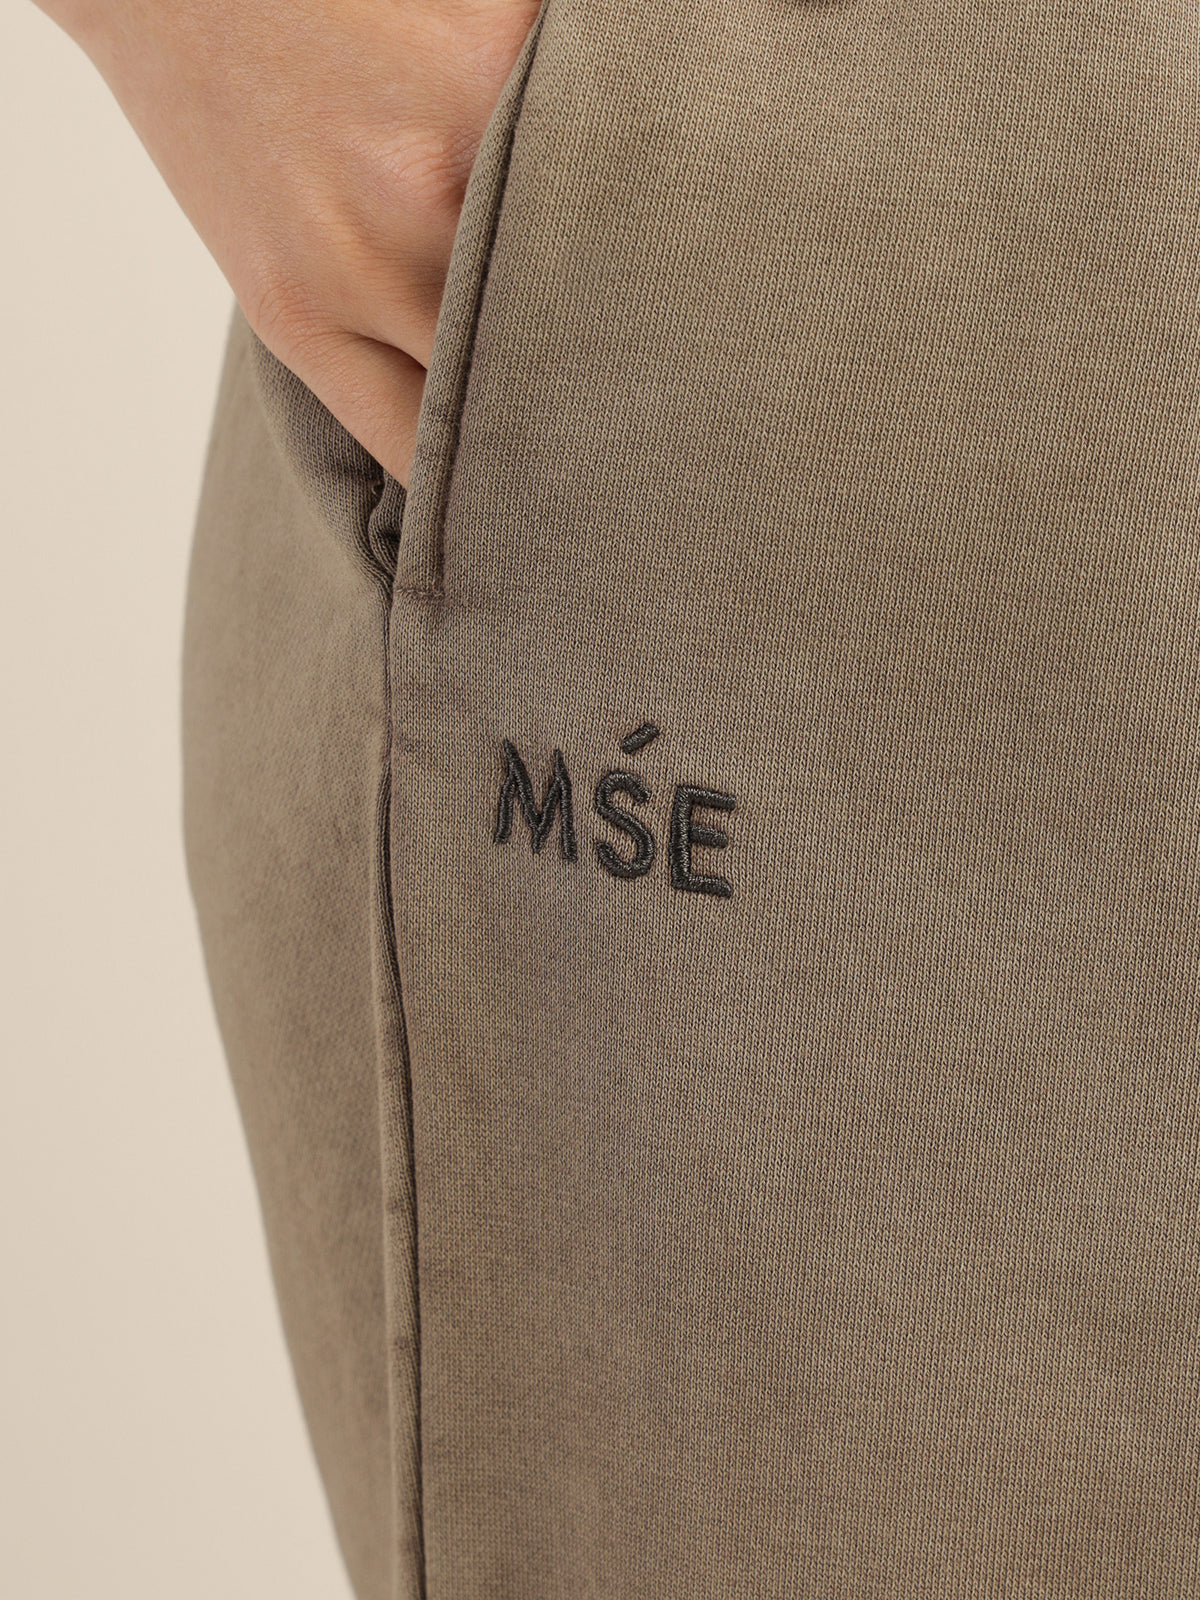 First Muse Trackpants in Peppercorn